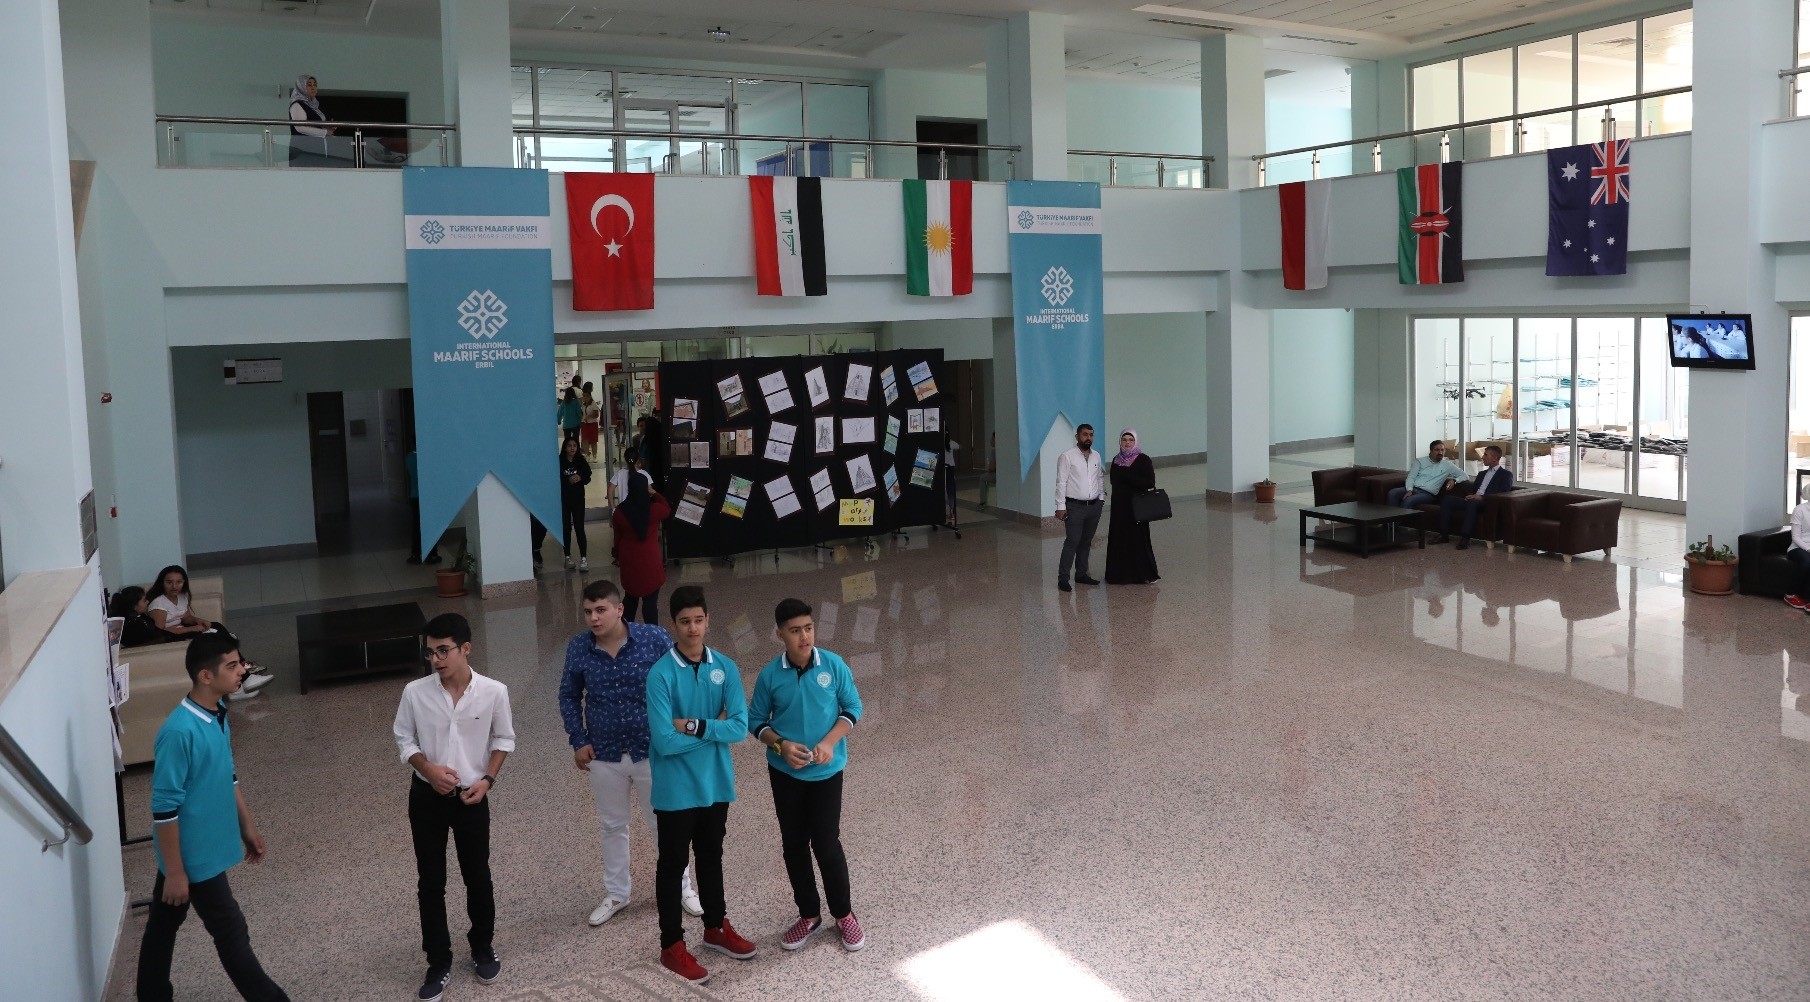 With 500 students, the Maarif International School has quickly become one of the most prominent schools in Irbil, thanks to the great interest shown by the local people.